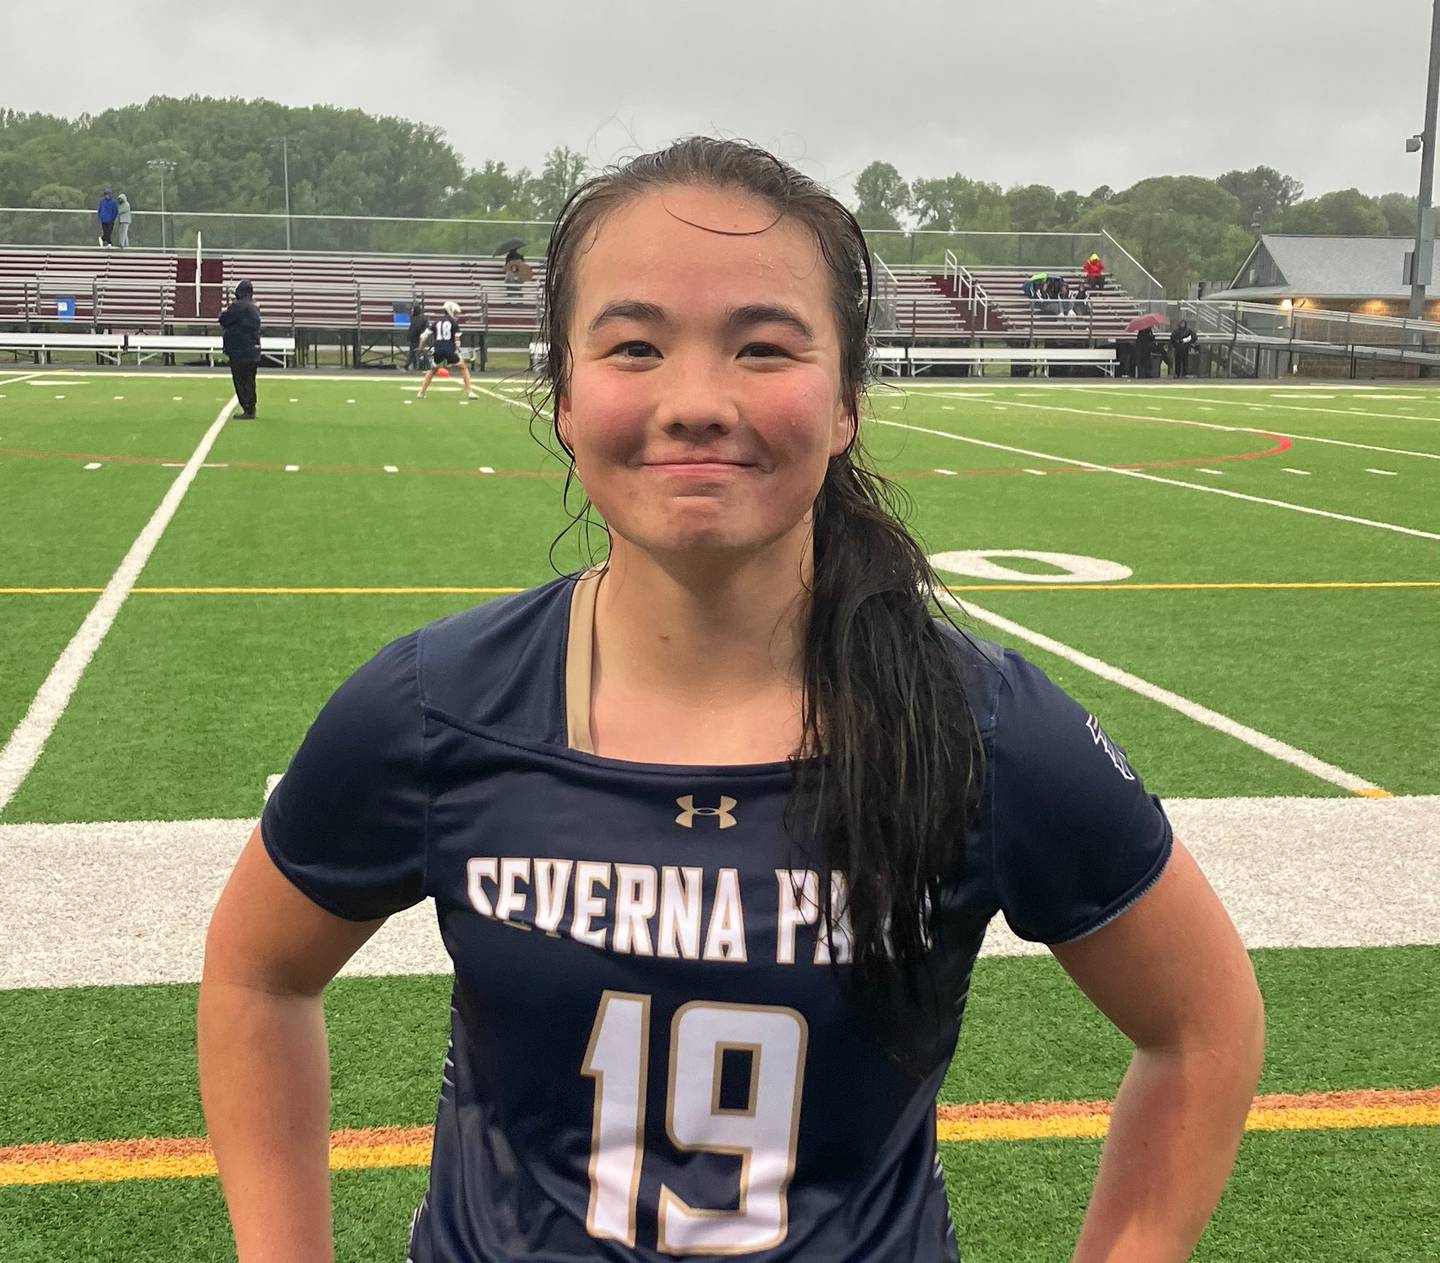 Alyssa Gore-Chung helped Severna Park's girls lacrosse team itch closer to the Anne Arundel County regular season championship. The junior attack scored four goals as the No. 9 Falcons defeated 10th-ranked Broadneck, 8-7, in soggy Cape St. Claire.